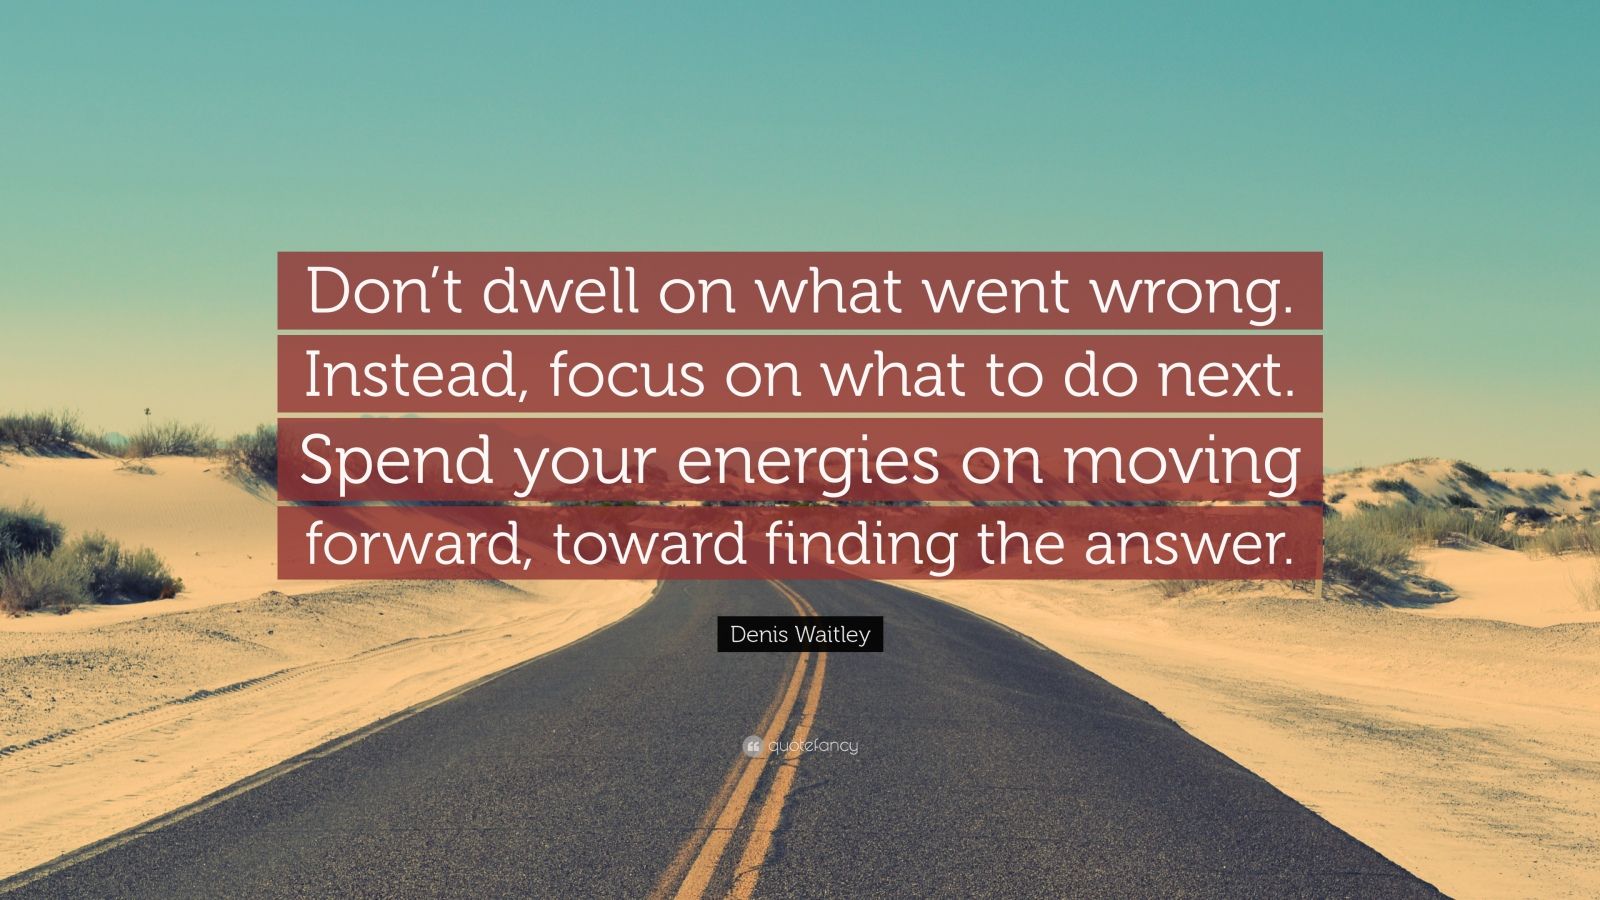 Denis Waitley Quote: “Don’t dwell on what went wrong. Instead, focus on ...